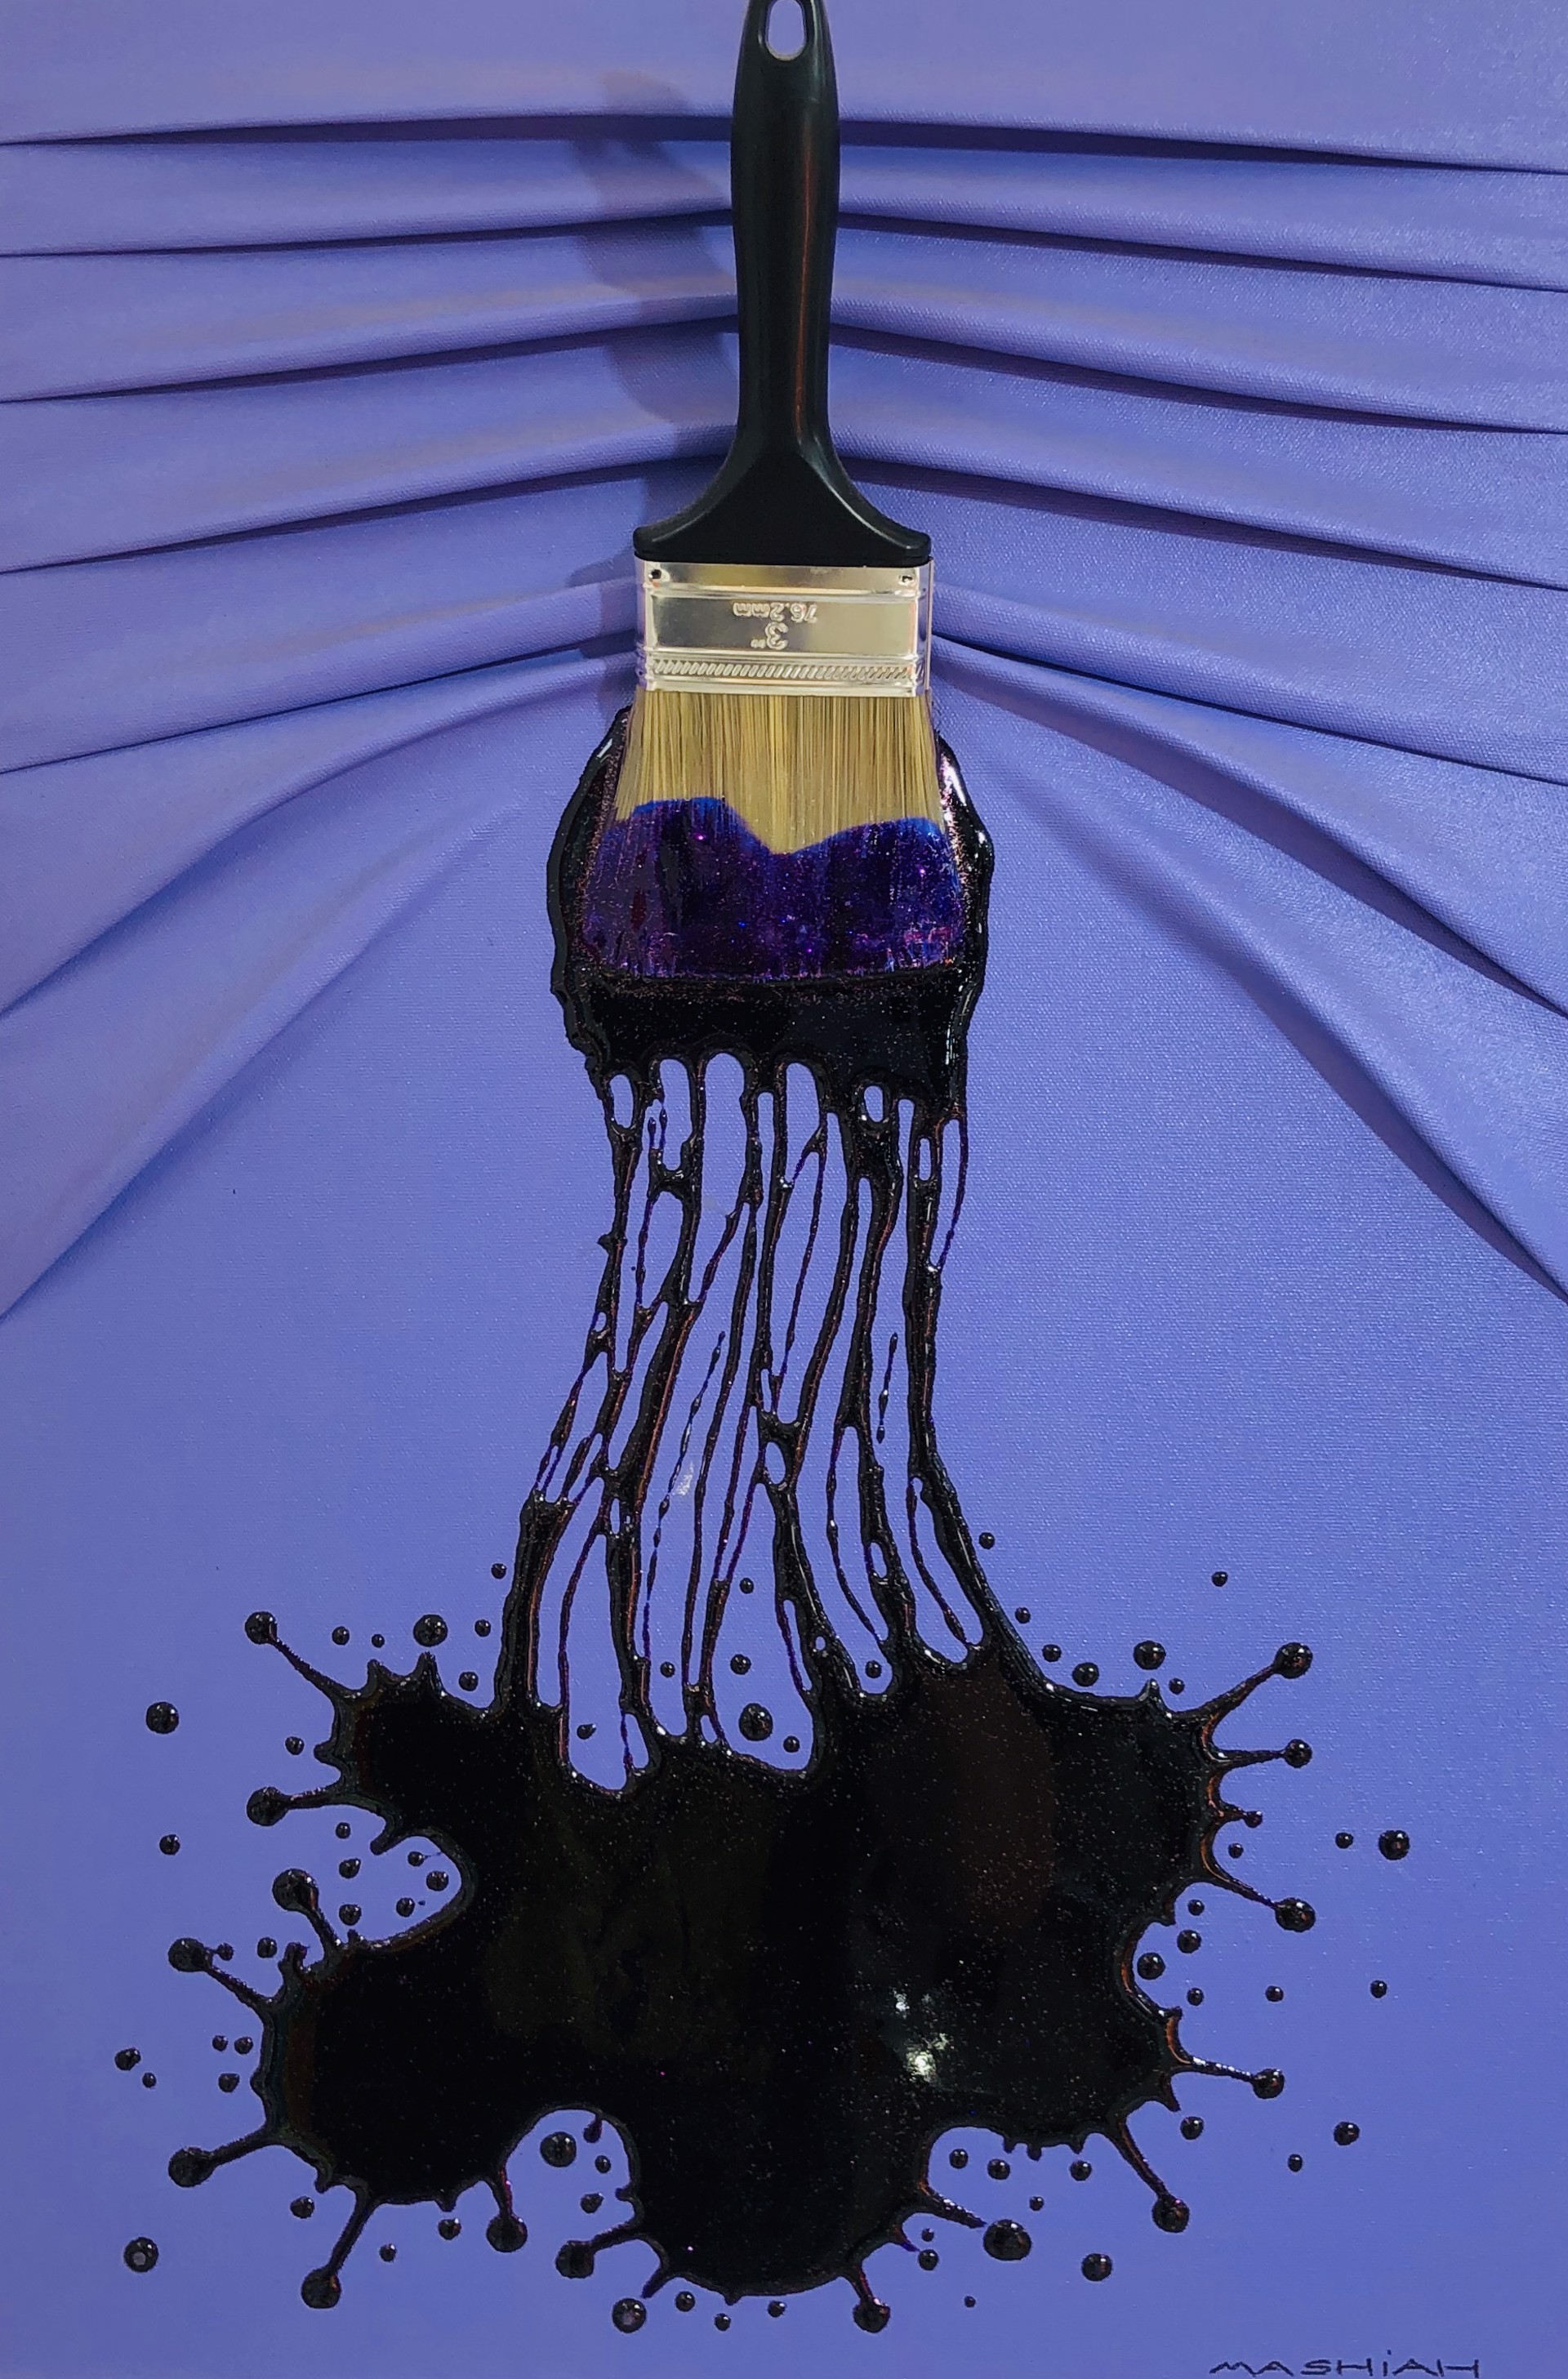  Black Splash on Purple Small Canvas by Brushes and Rollers "Let's Paint" by Efi Mashiah